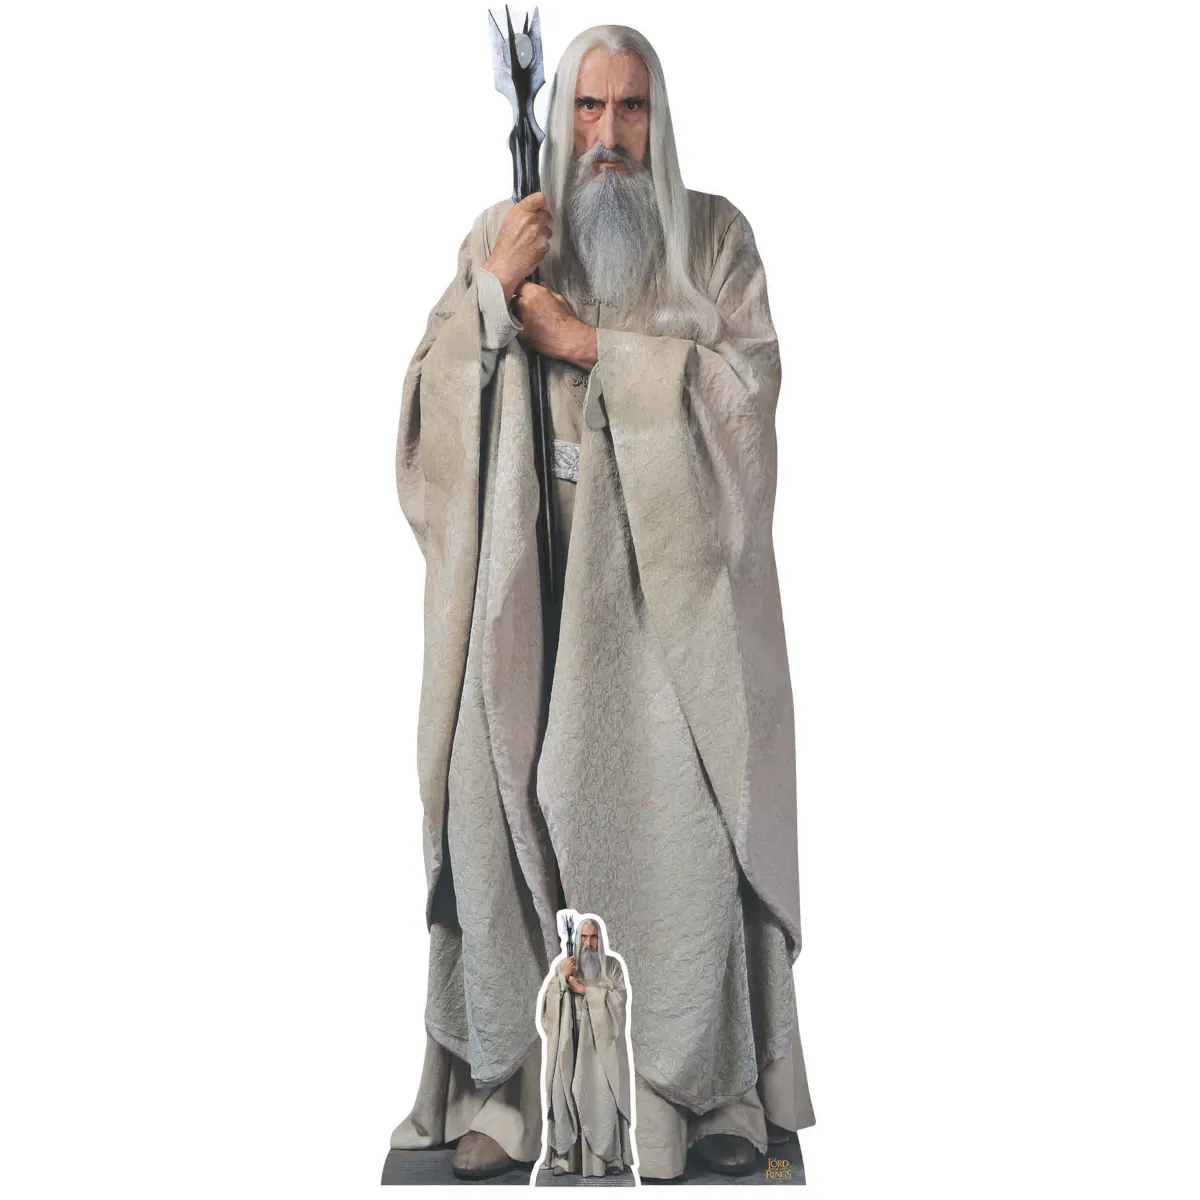 SC4135 Saruman (The Lord of the Rings) Official Lifesize + Mini Cardboard Cutout Standee Front